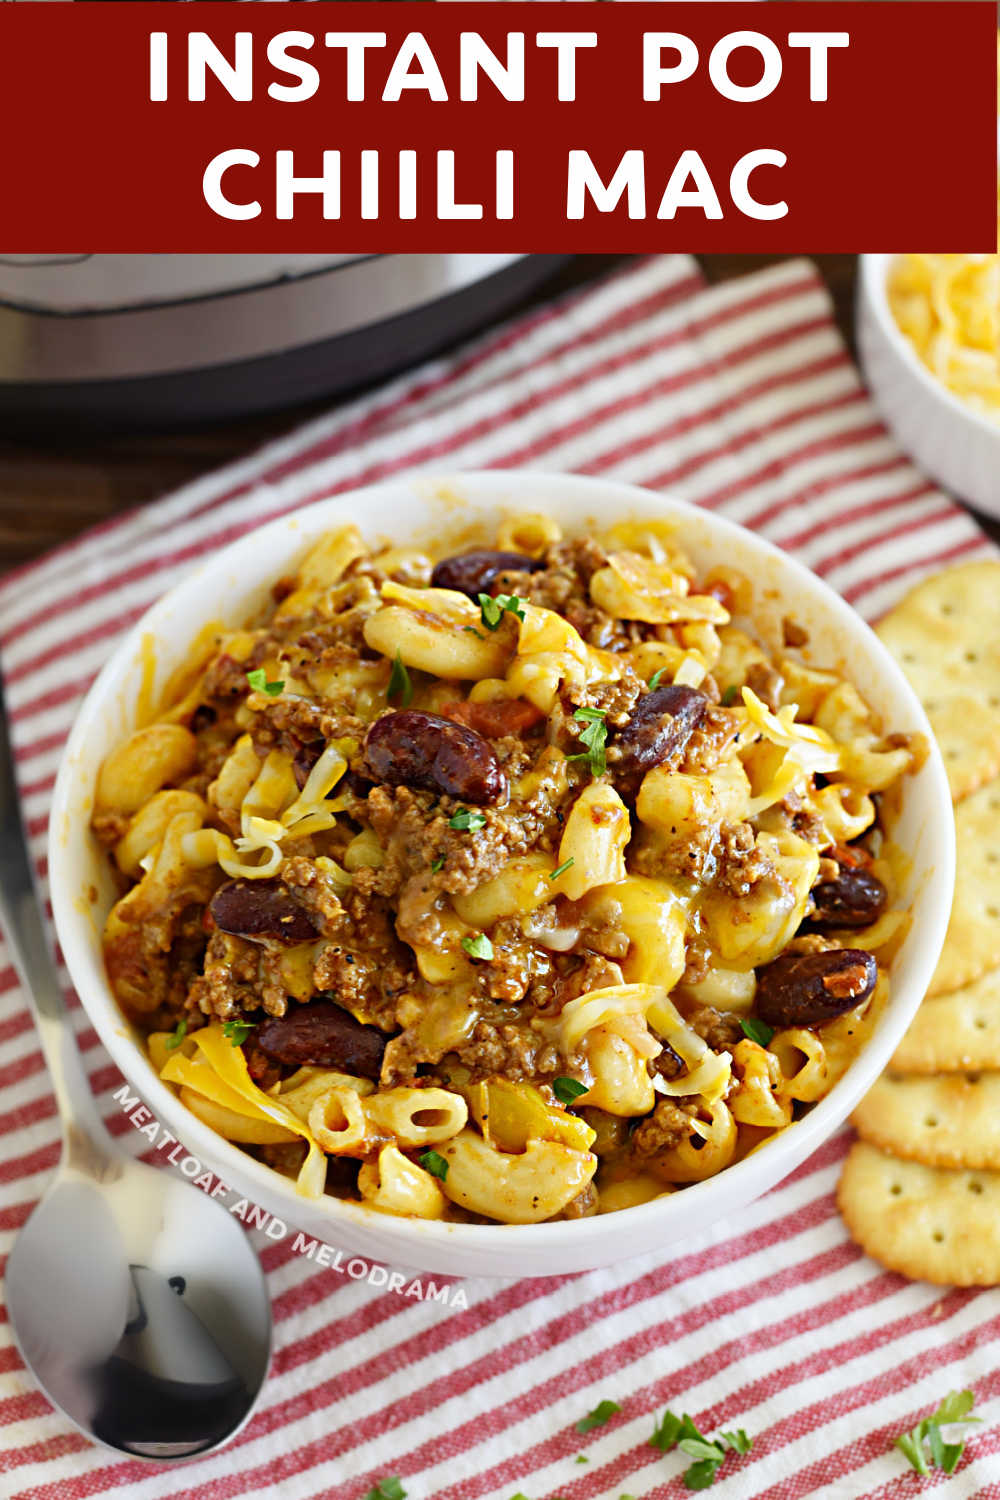 Instant Pot Chili Mac made with lean ground beef, elbow macaroni and lots of cheese is an easy dinner for busy weeknights or whenever you are craving the ultimate comfort food. This chili mac recipe is easy weeknight meal your whole family will love! via @meamel